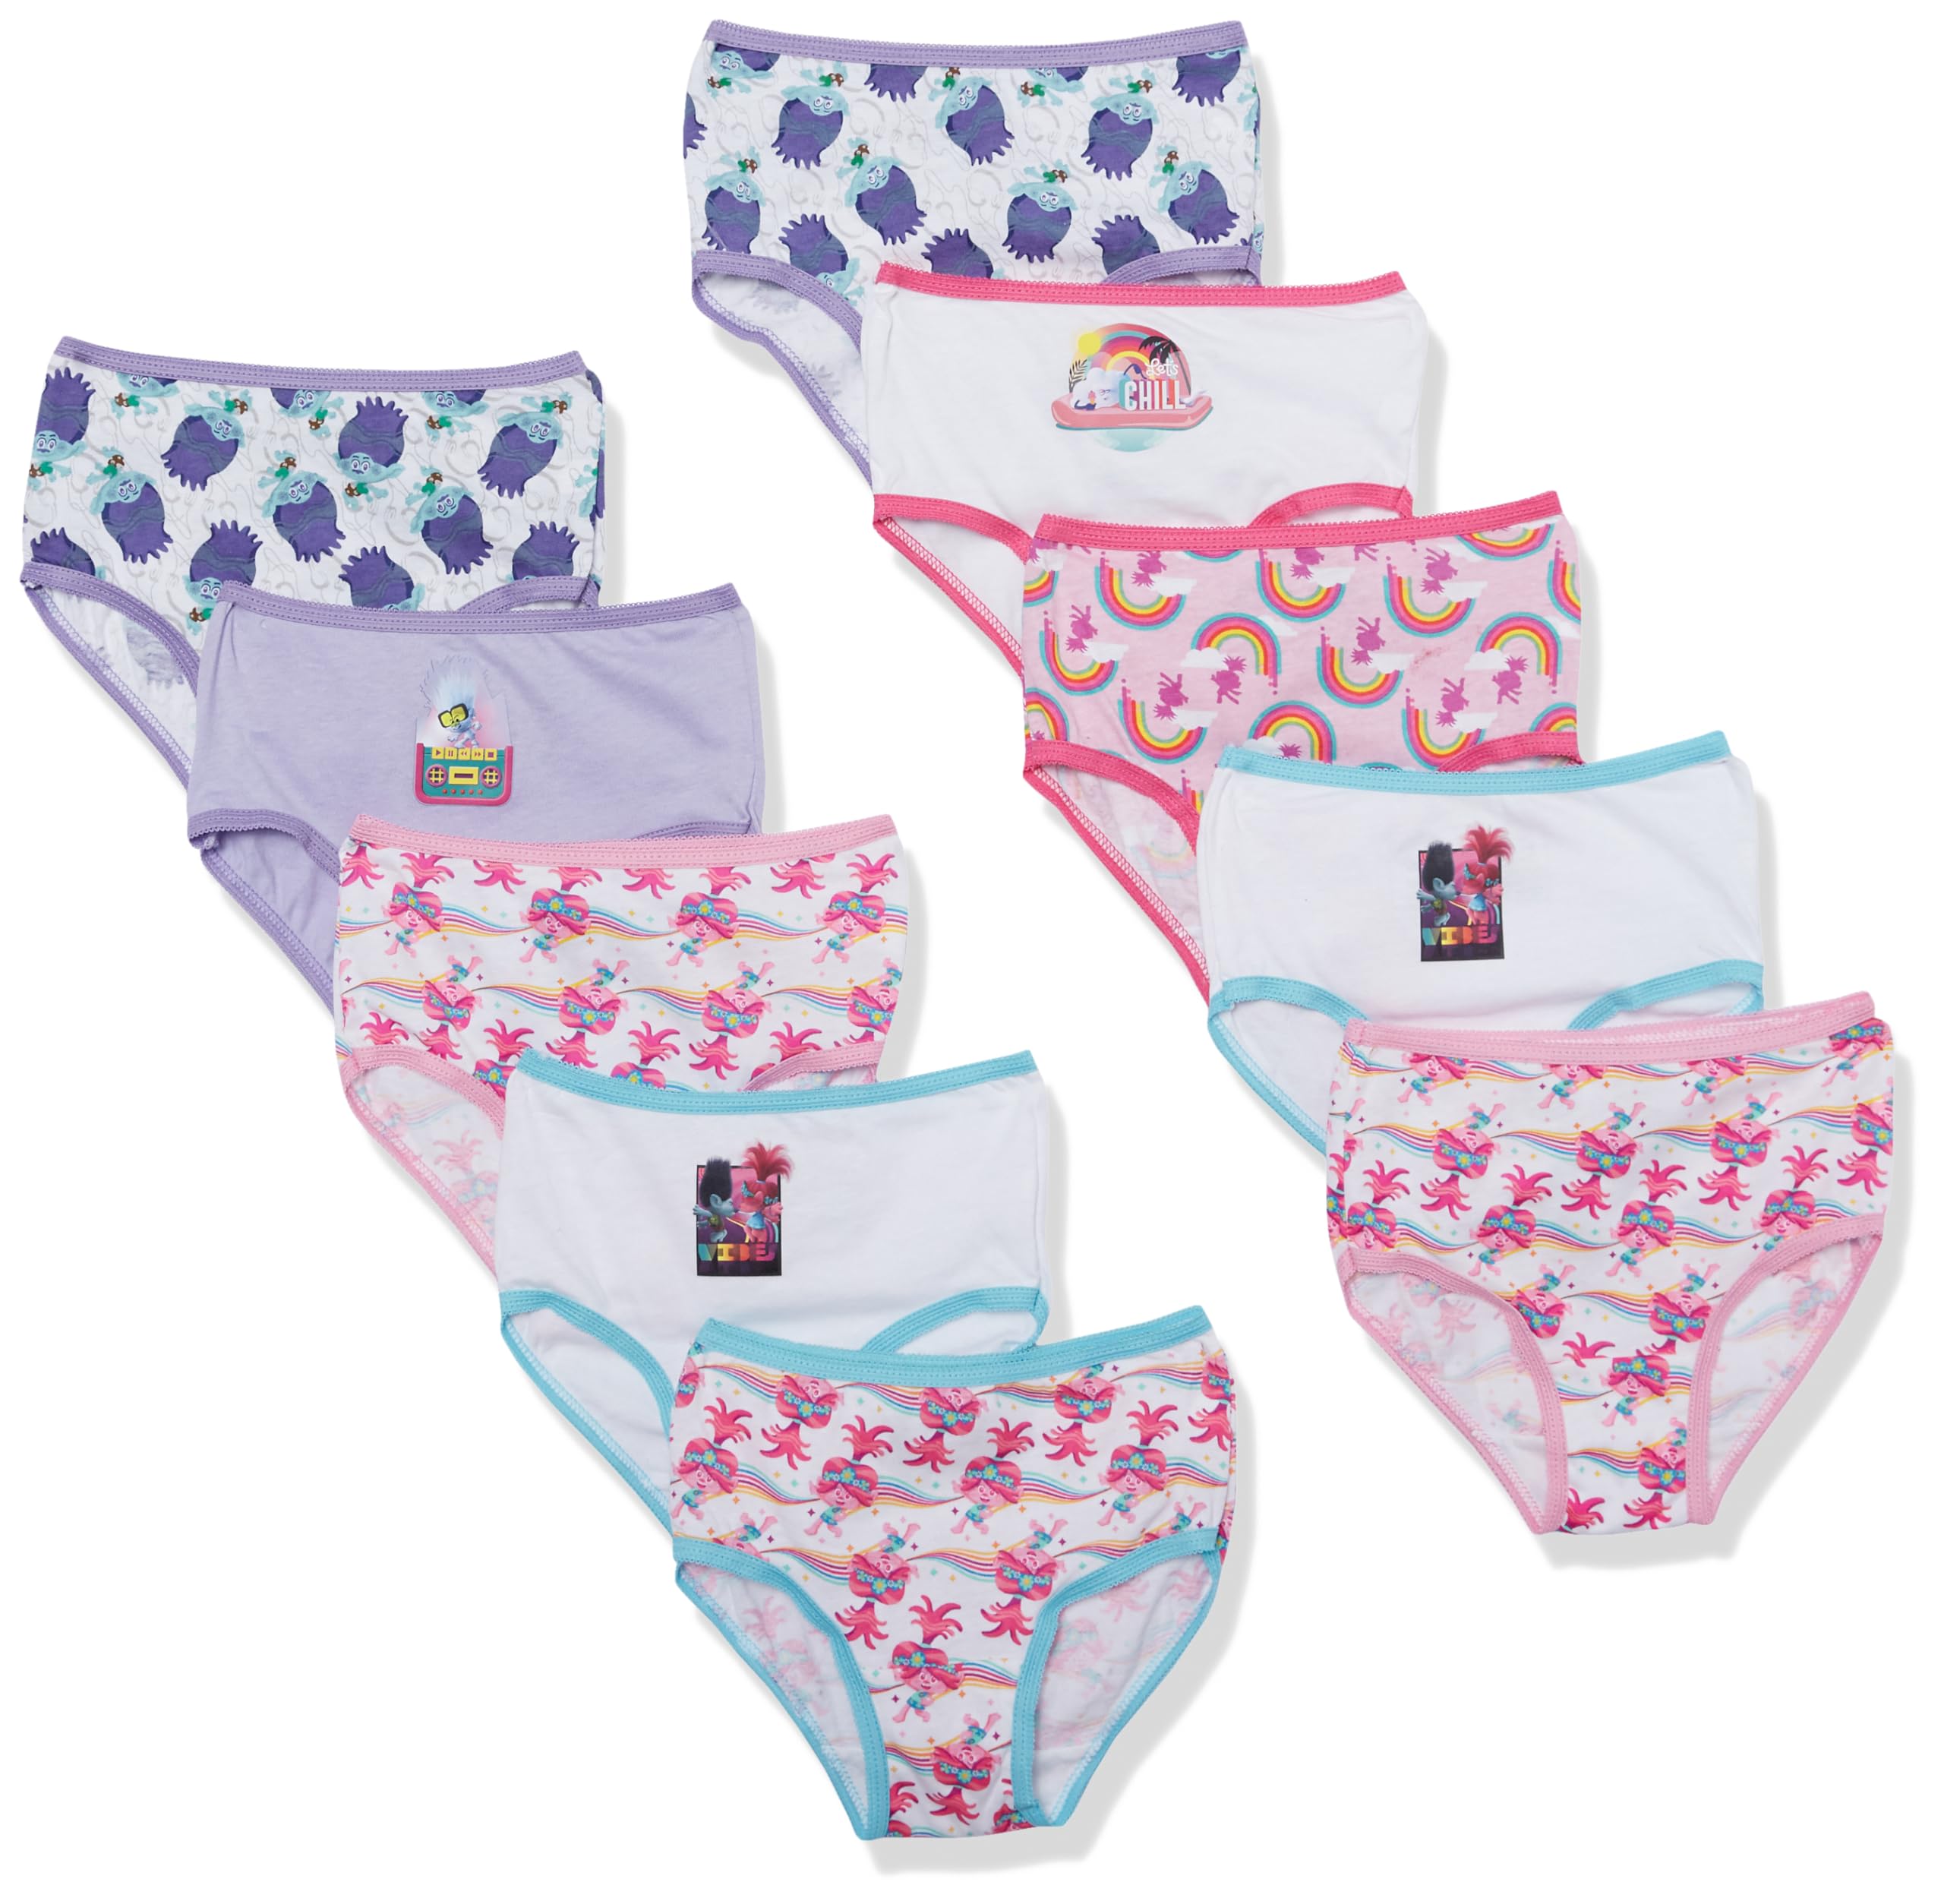 Universal Girls 100% Combed Cotton Trolls Panties with Poppy, Branch, Guy Diamond & More in Sizes 2/3t, 4t, 4, 6, 8